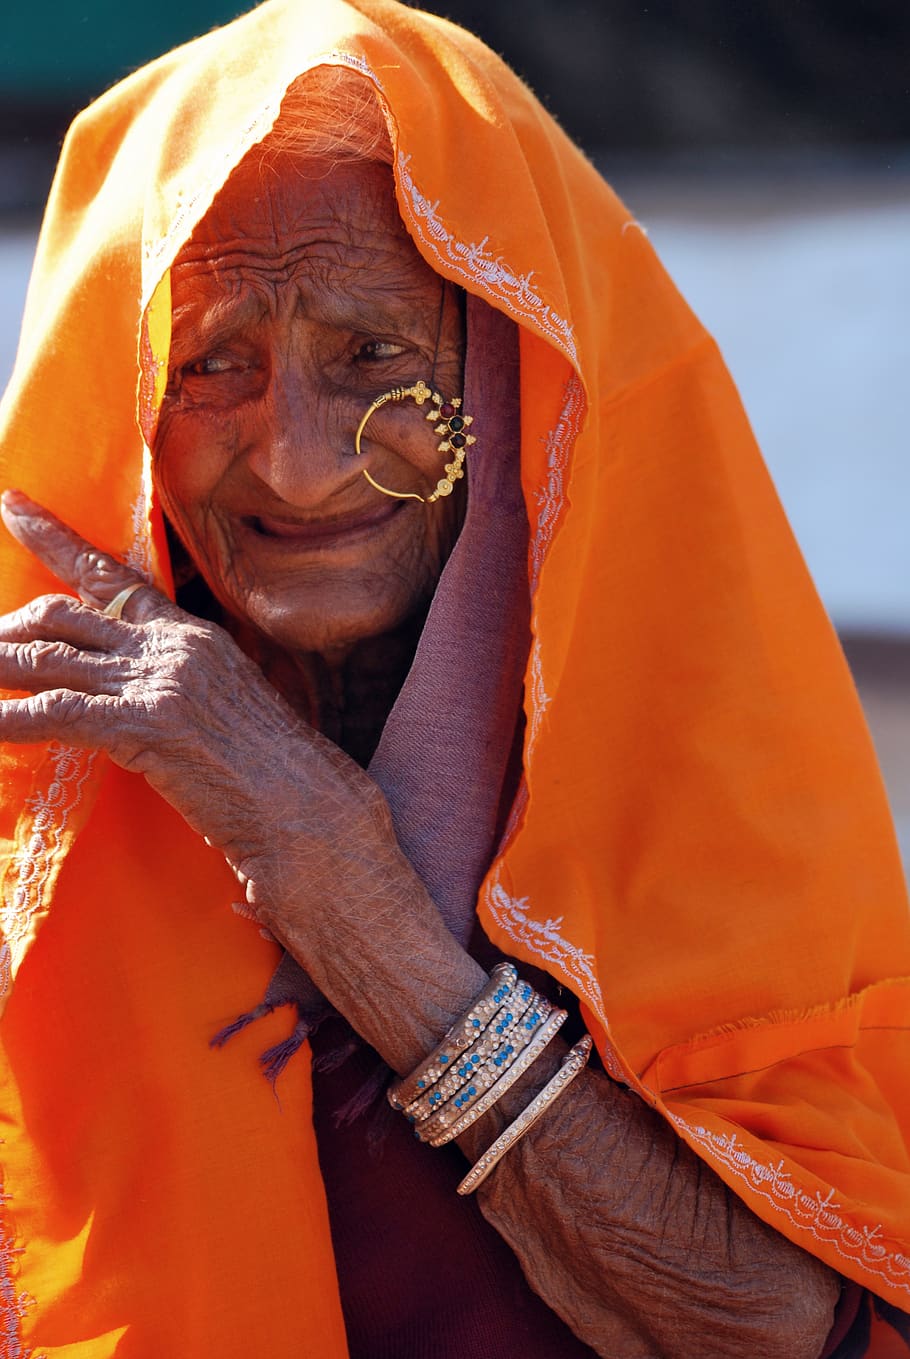 old lady, ethnic, wrinkles, jewelry, cultural, weather worn, orange, real people, one person, traditional clothing